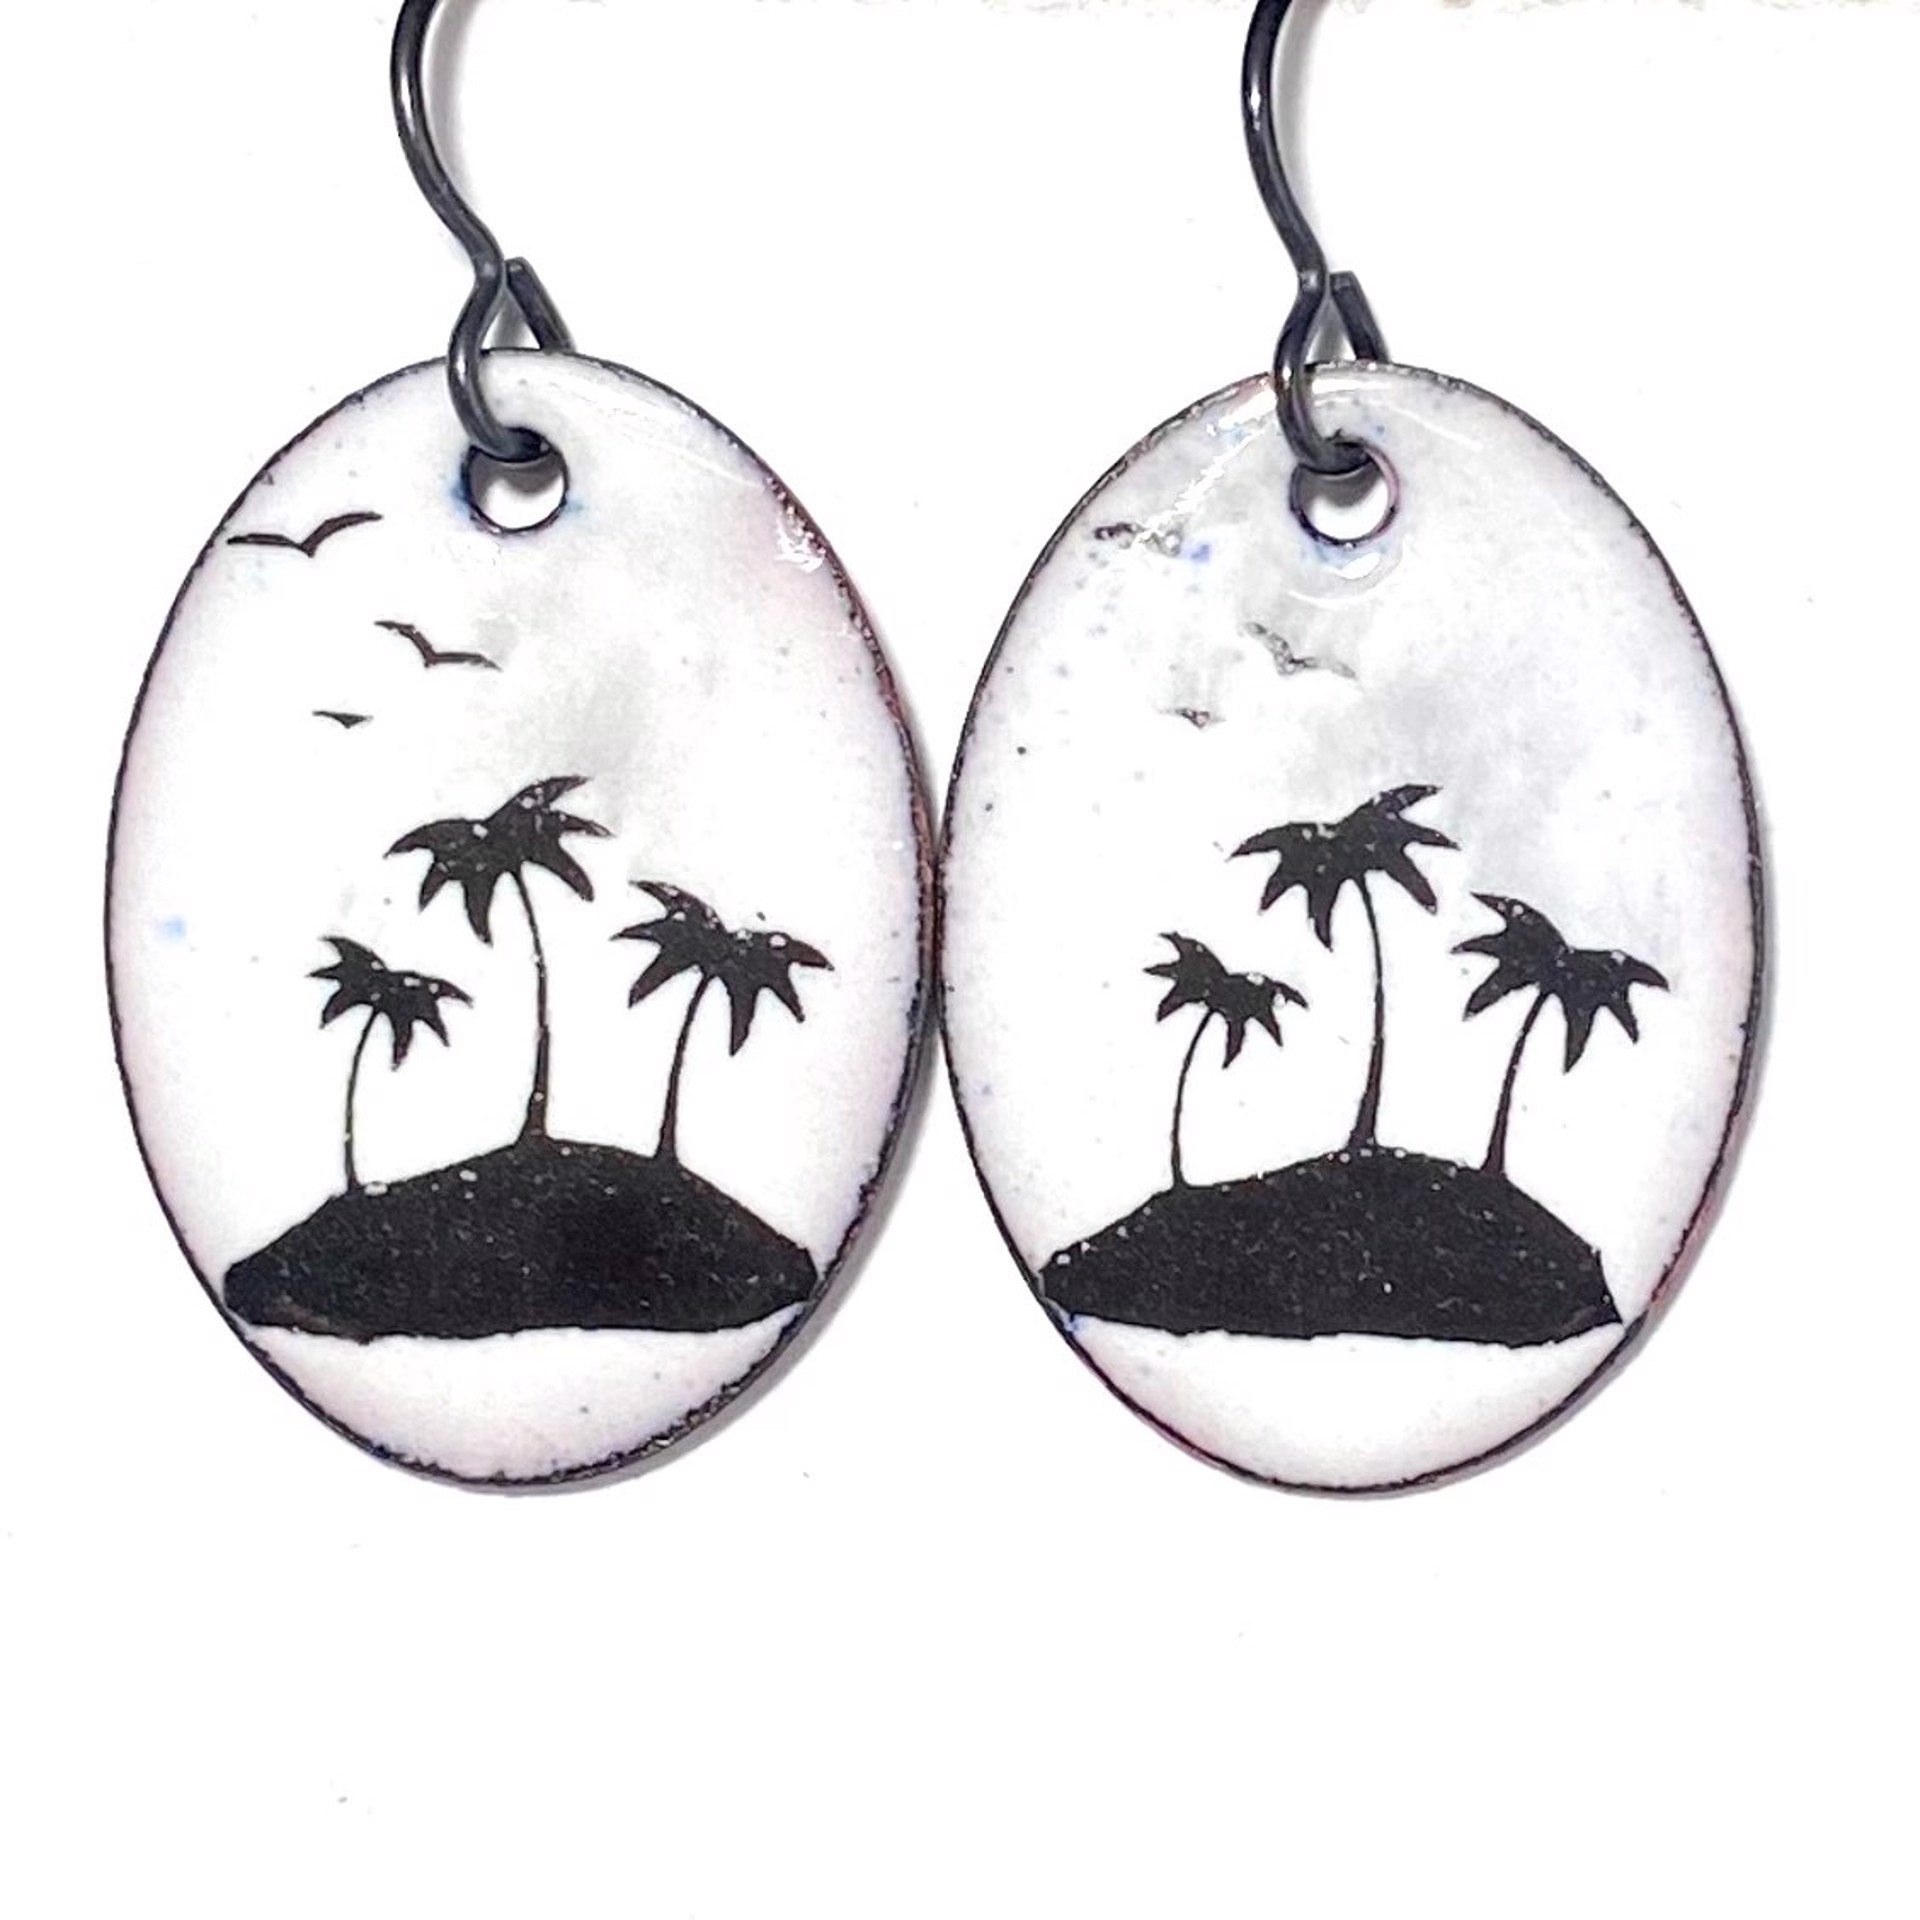 KH22-57 Enamel on Copper Oval Earrings ~with a porcelain Palm Tree mineral "decal" fired on top~ by Karen Hakim